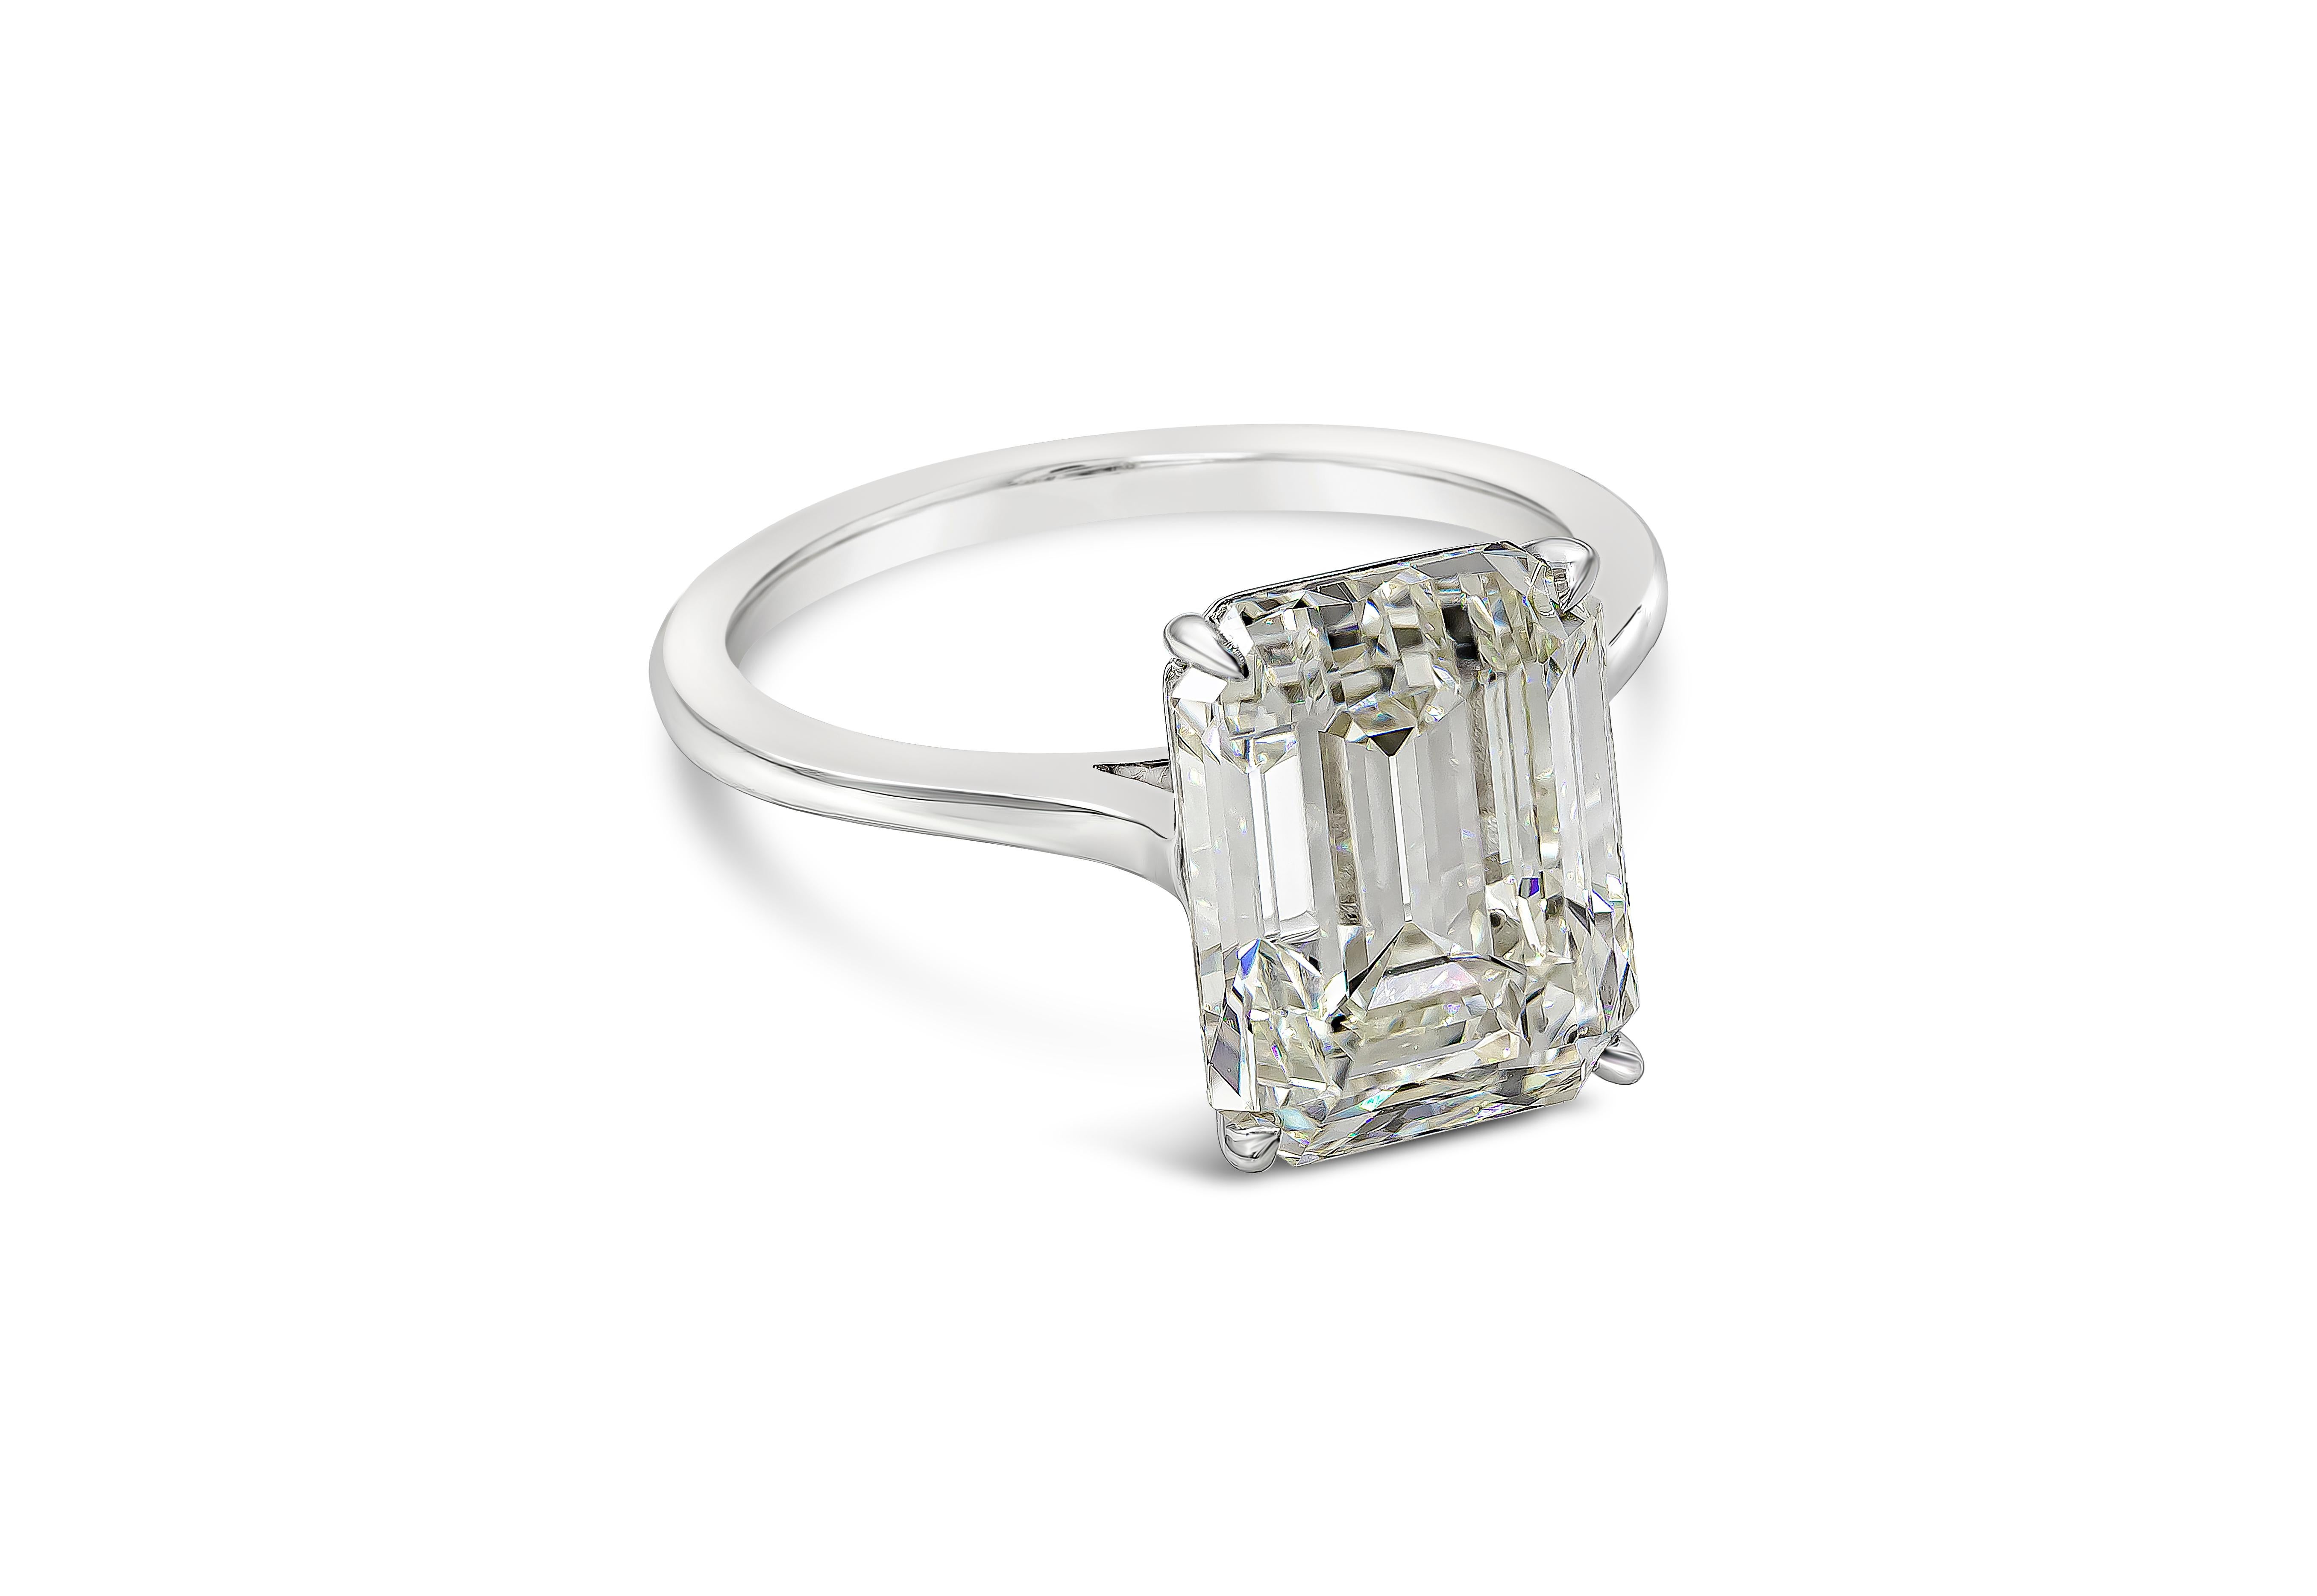 A classic and timeless engagement ring style showcasing a 5.56 carat total emerald cut diamond certified by GIA as K color and VVS2 in clarity. Set in a thin mounting made in 18K white gold. Size 6.5 US and resizable upon request.

Roman Malakov is